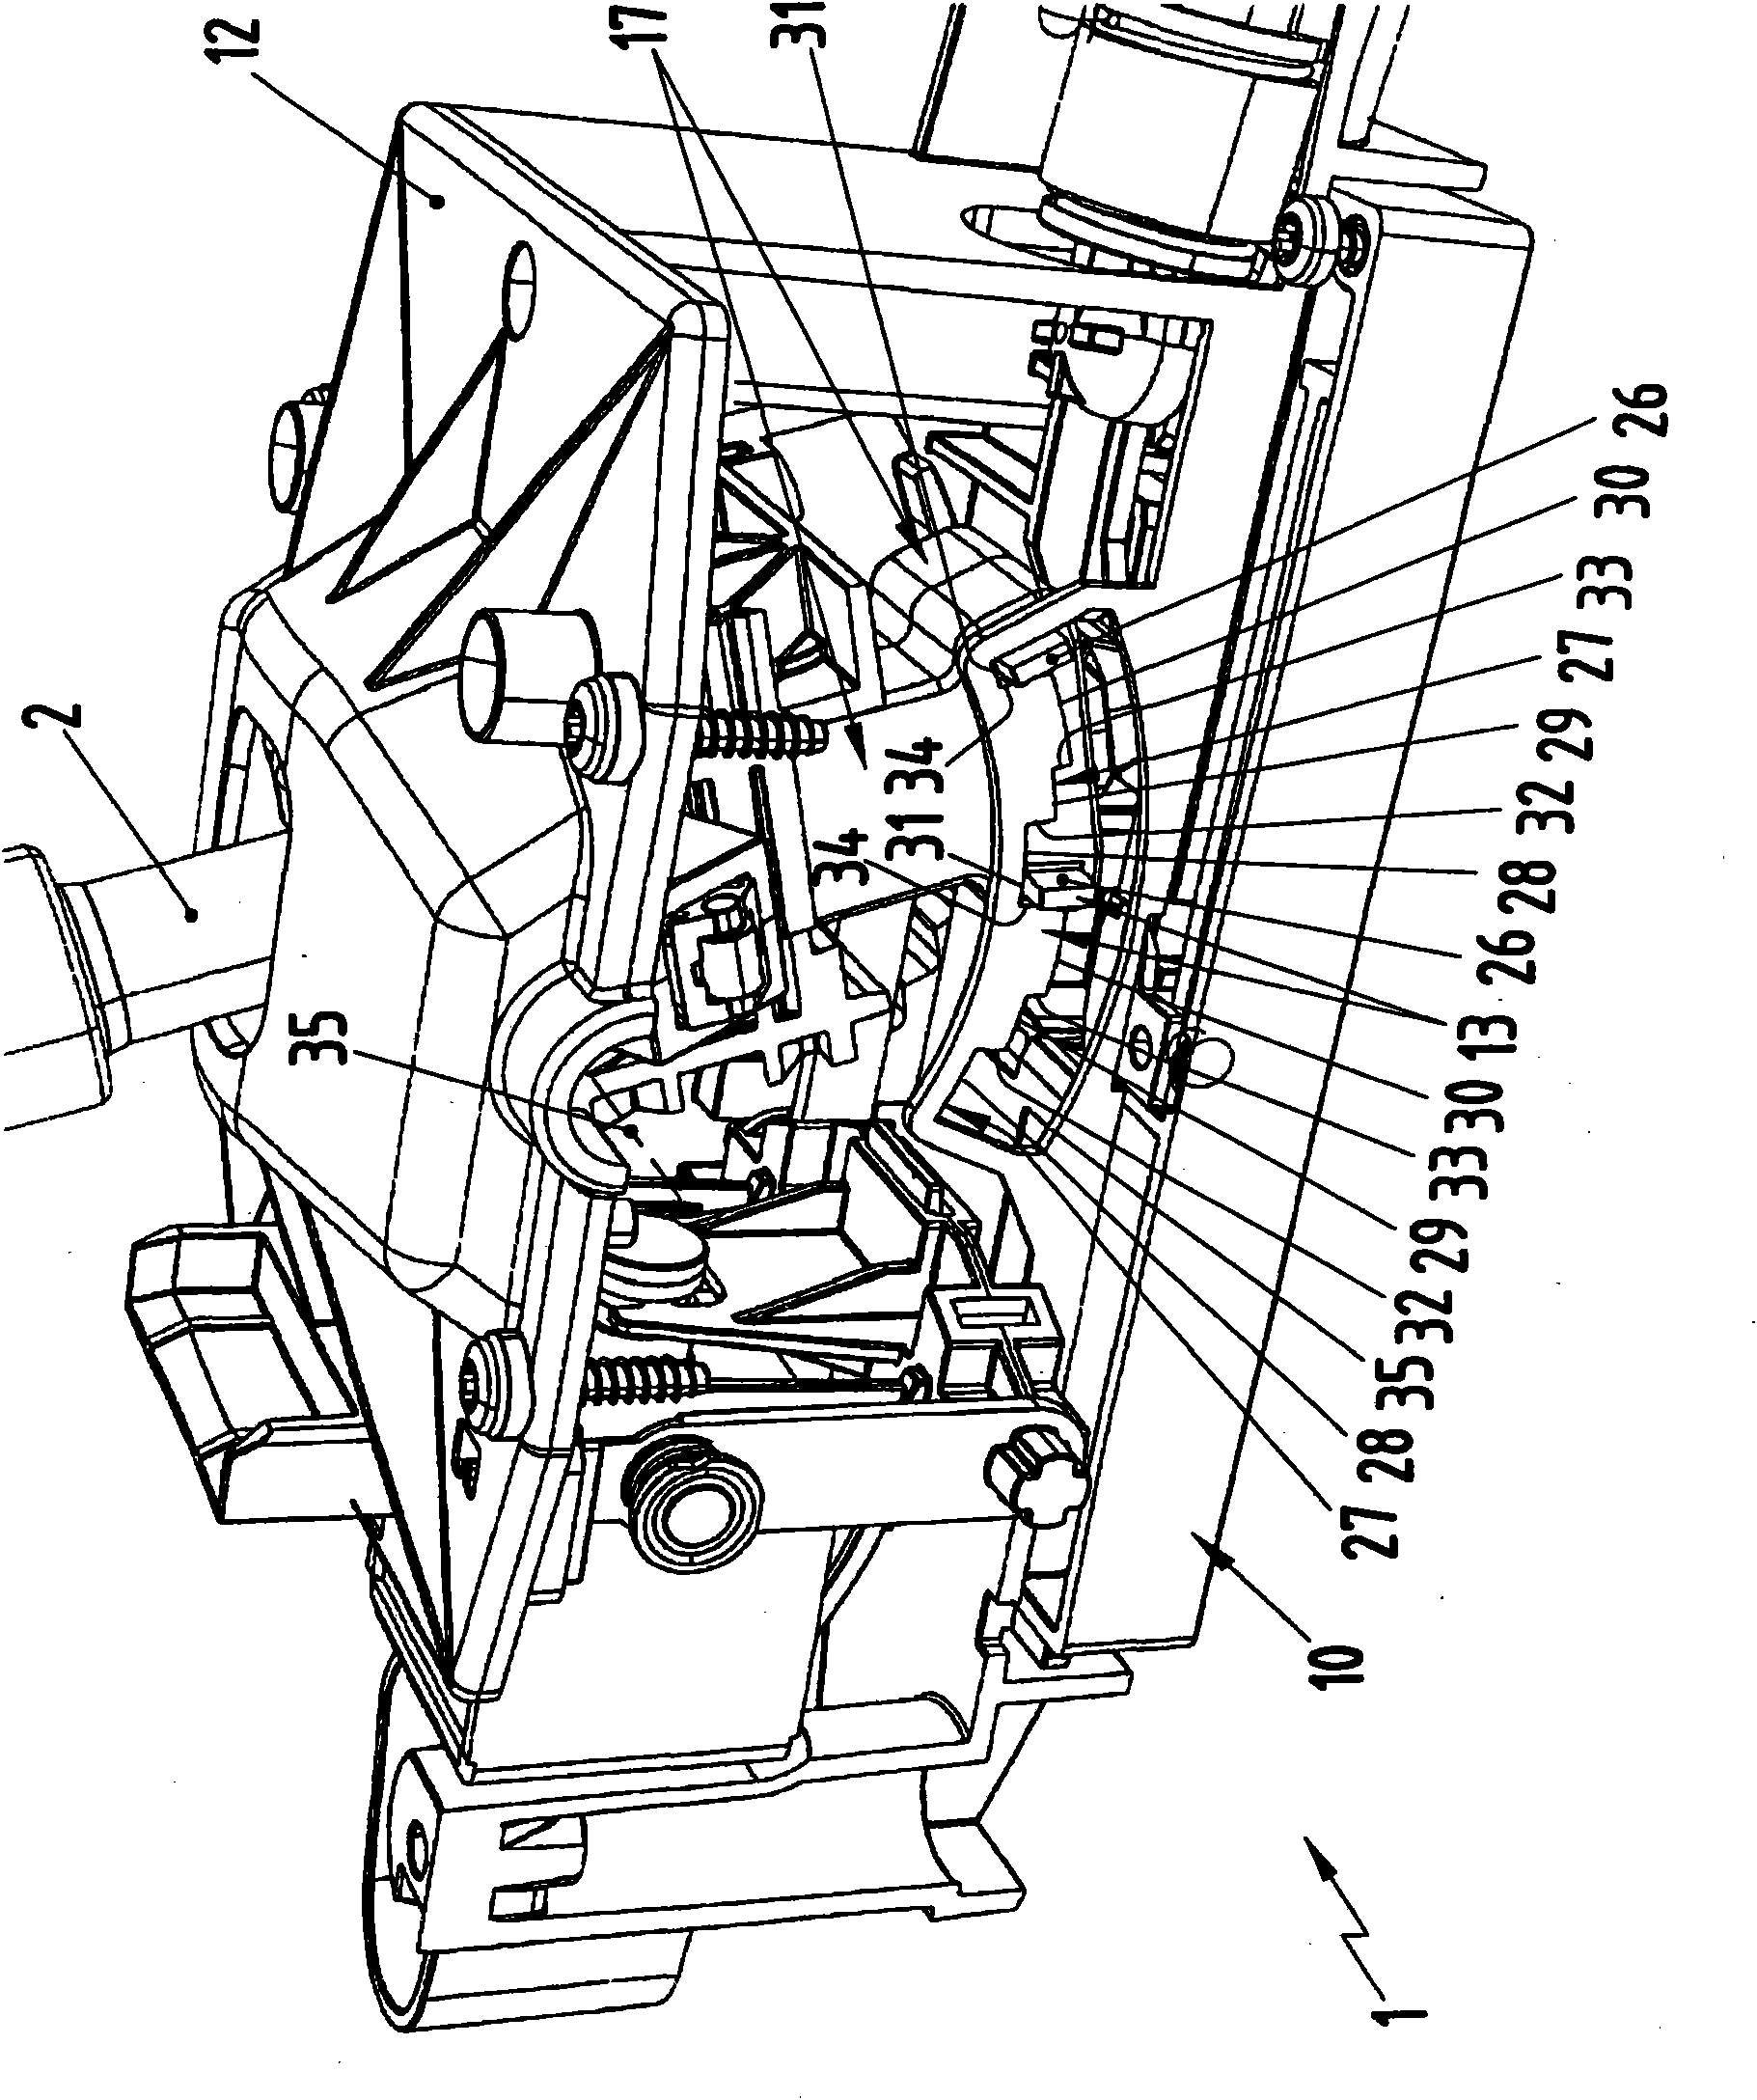 Gear-shifting device for automatic transmission